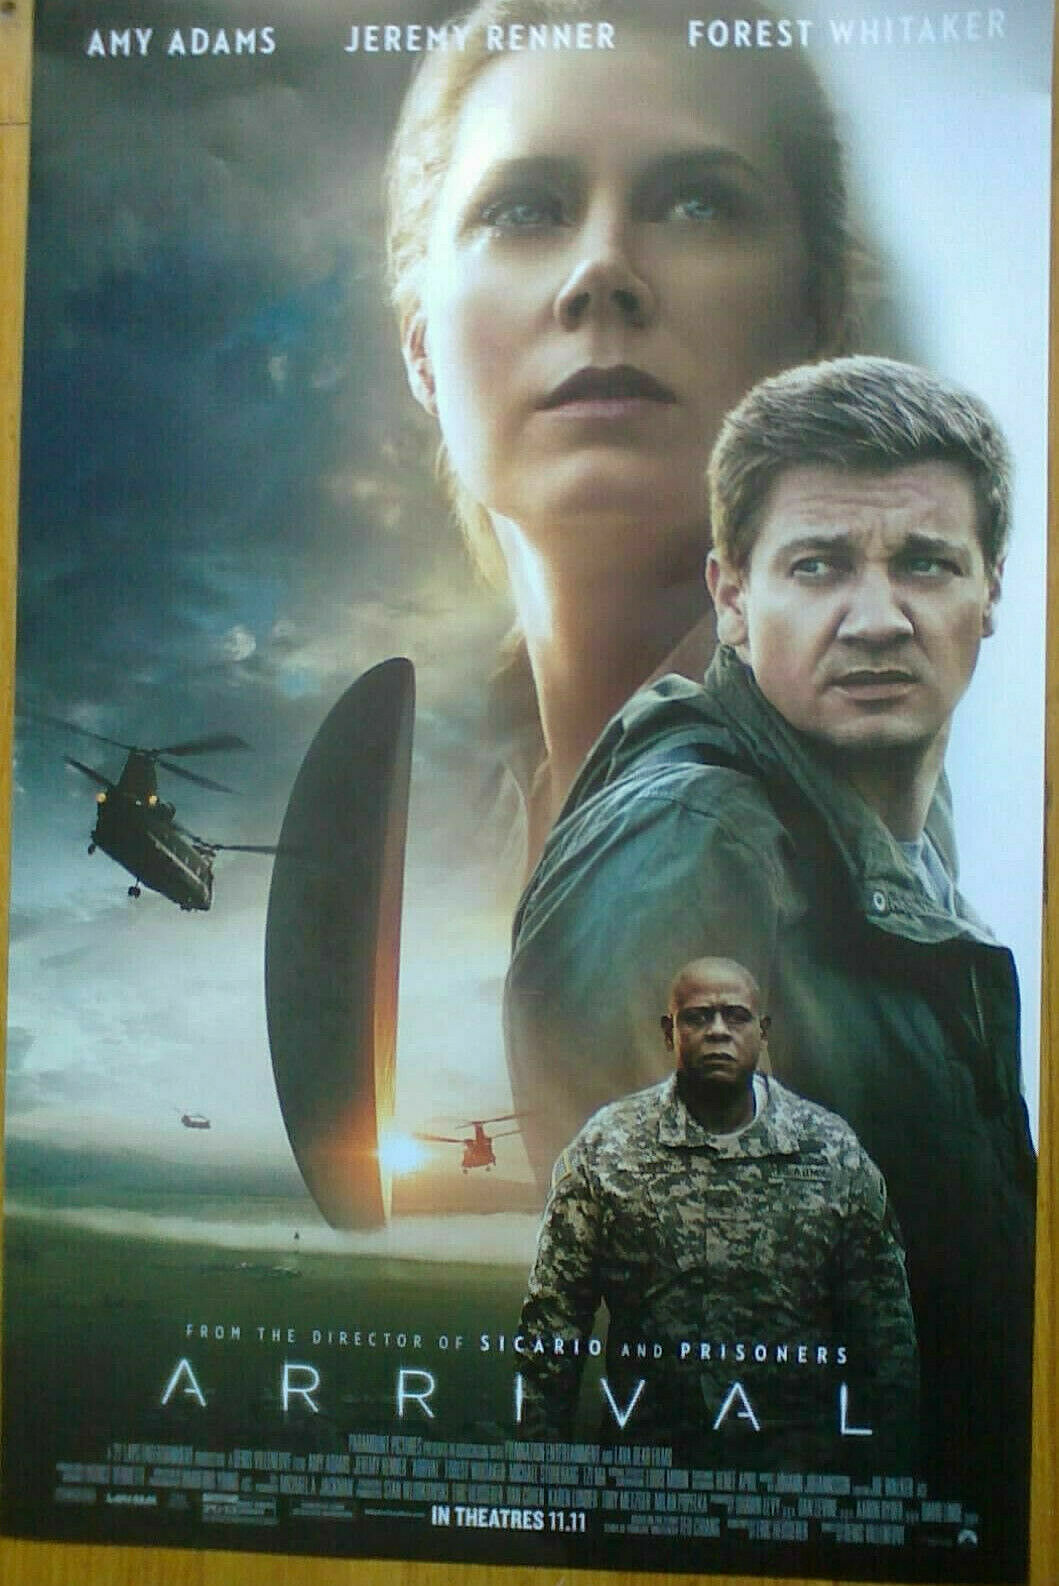 Arrival - New 2016 11x17 Mini Movie Poster, Amy Adams, Jeremy Renner